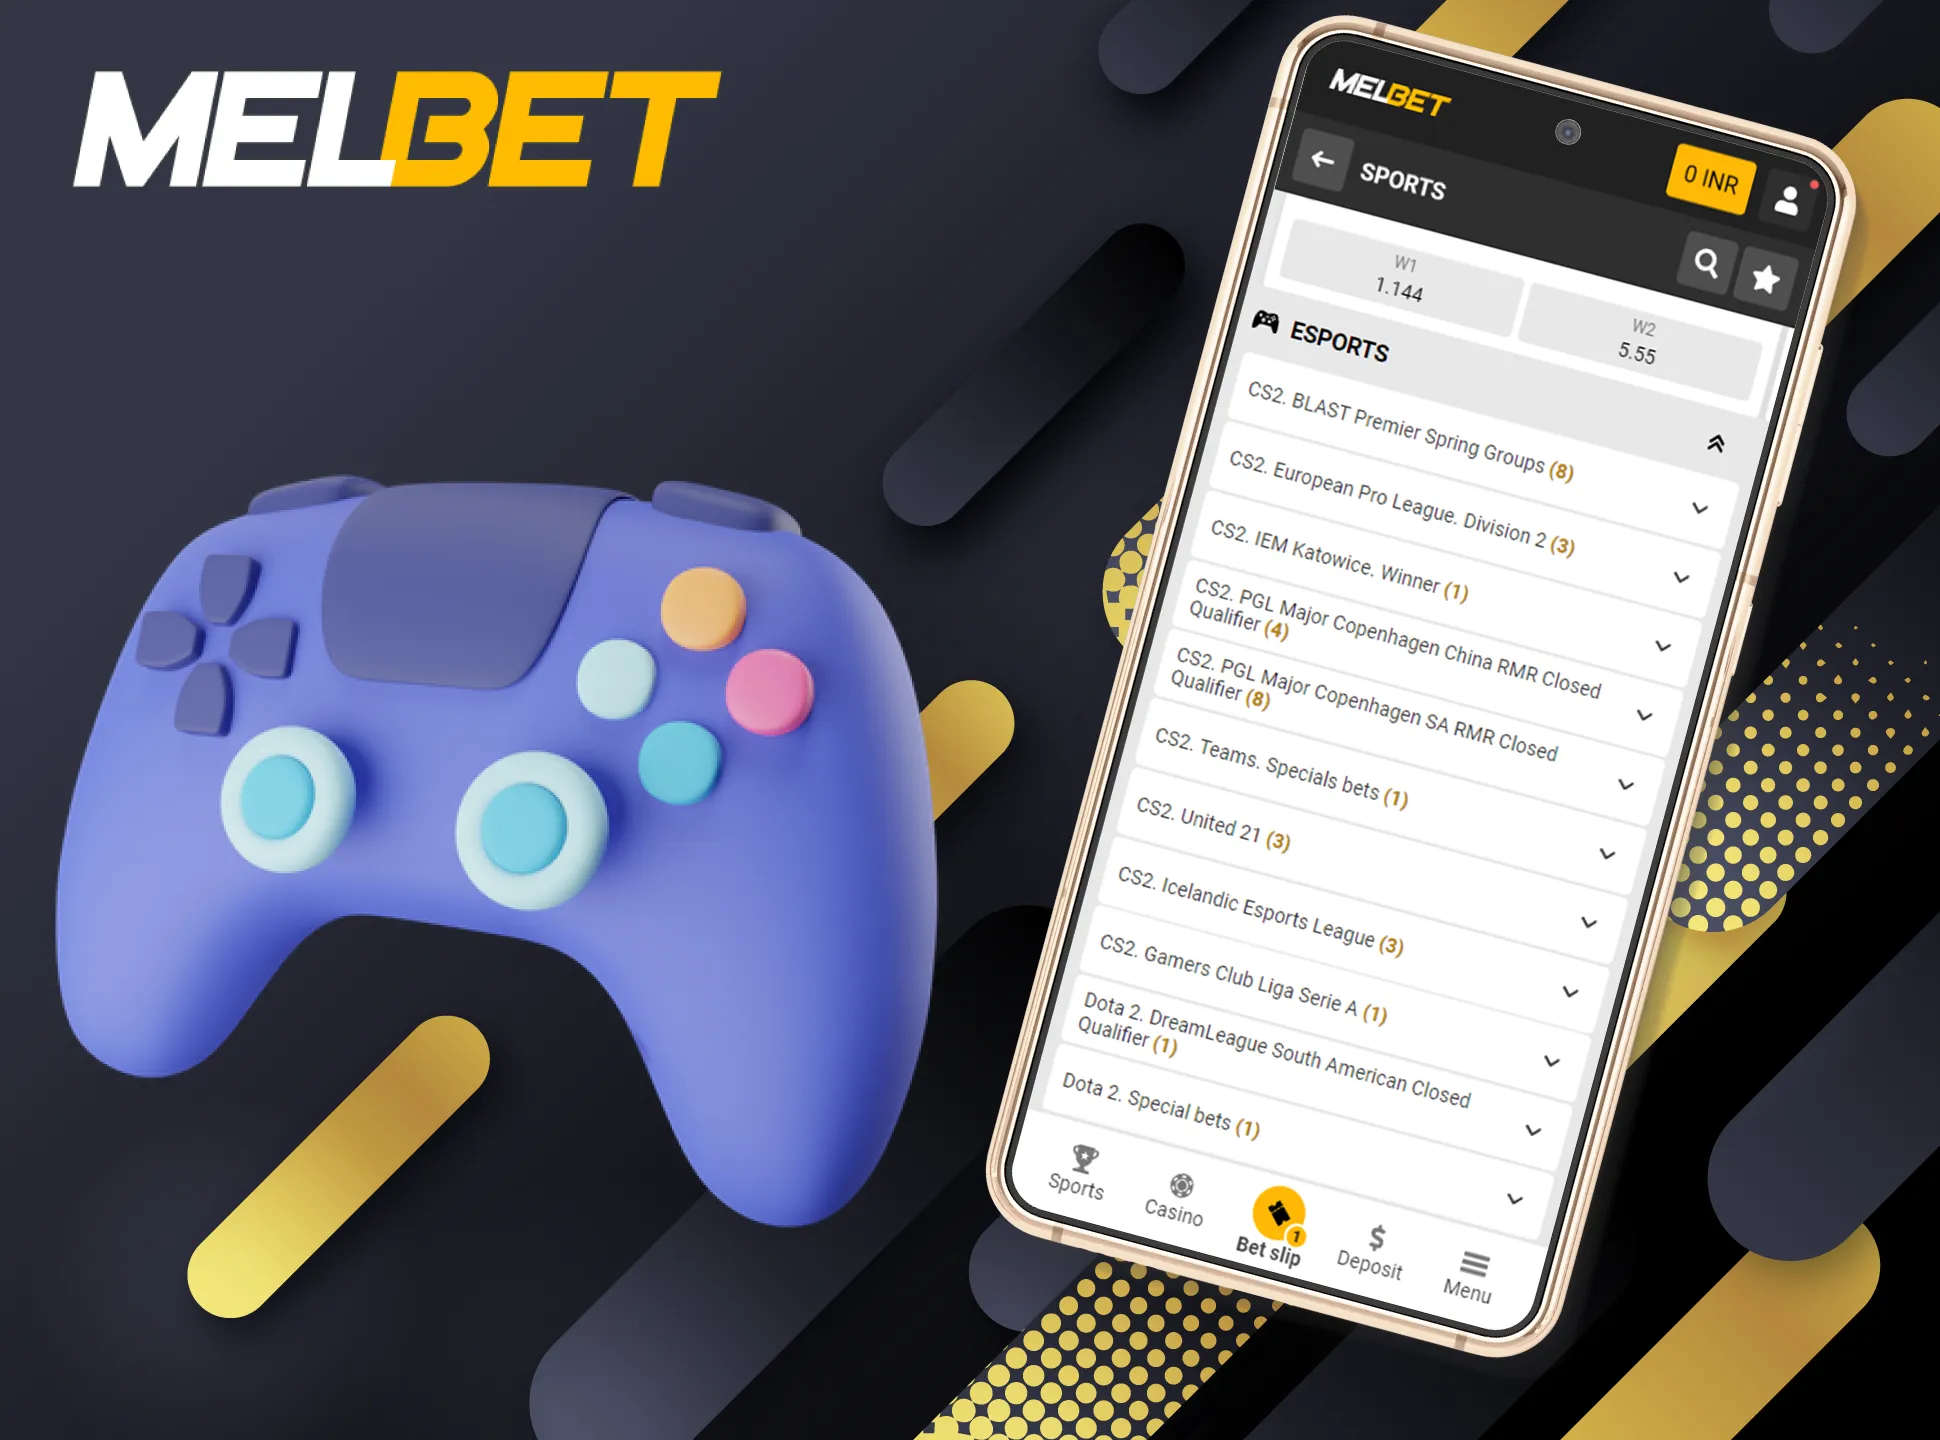 Cybersports amateurs can also place bets on Dota 2, CS:GO and other well-known esports competitions.